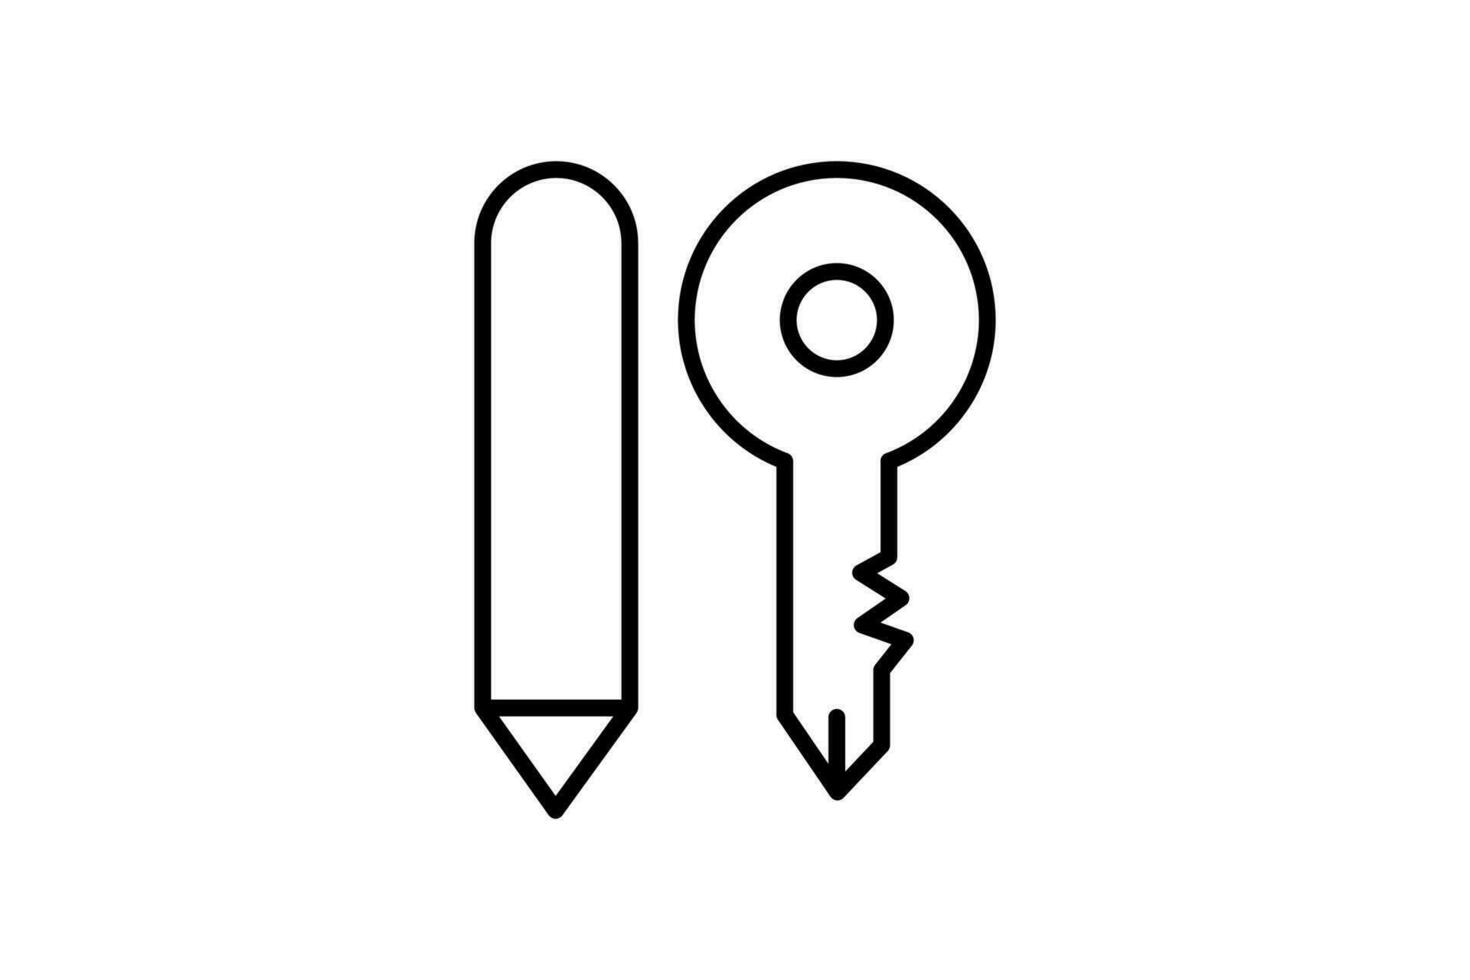 Keyword icon. Icon related to Search Engine Optimization. suitable for web site design, app, user interfaces. line icon style. Simple vector design editable